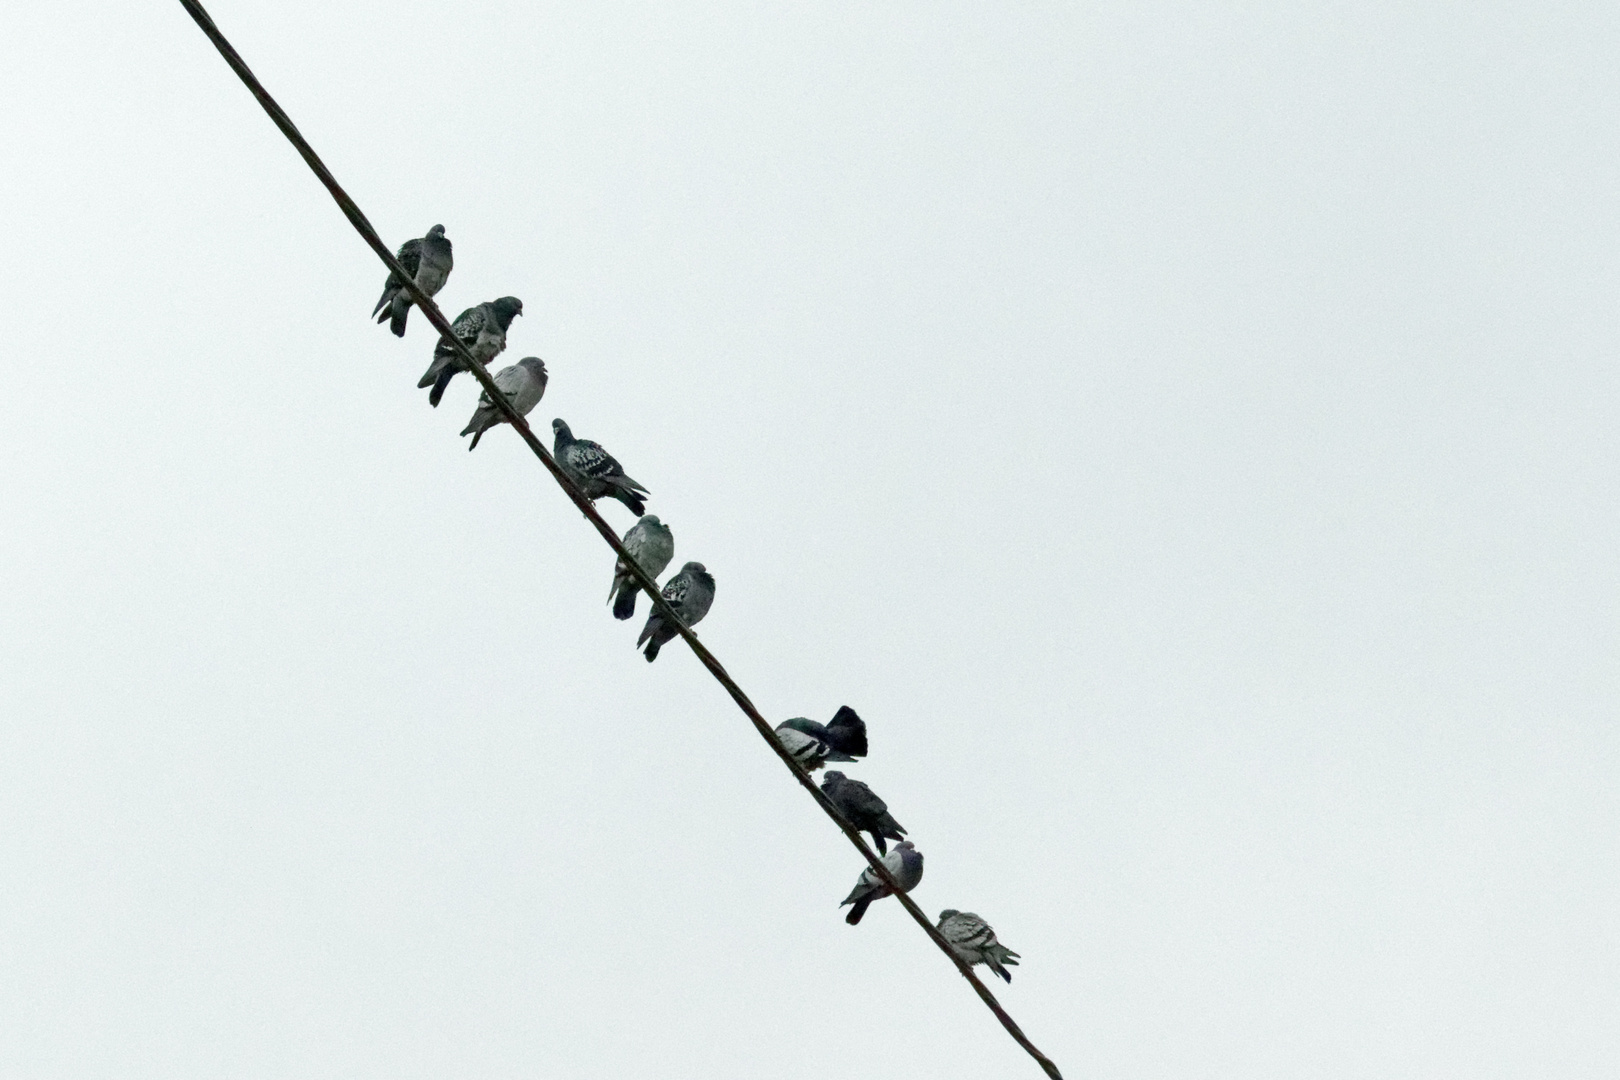 Pigeons on a Wire